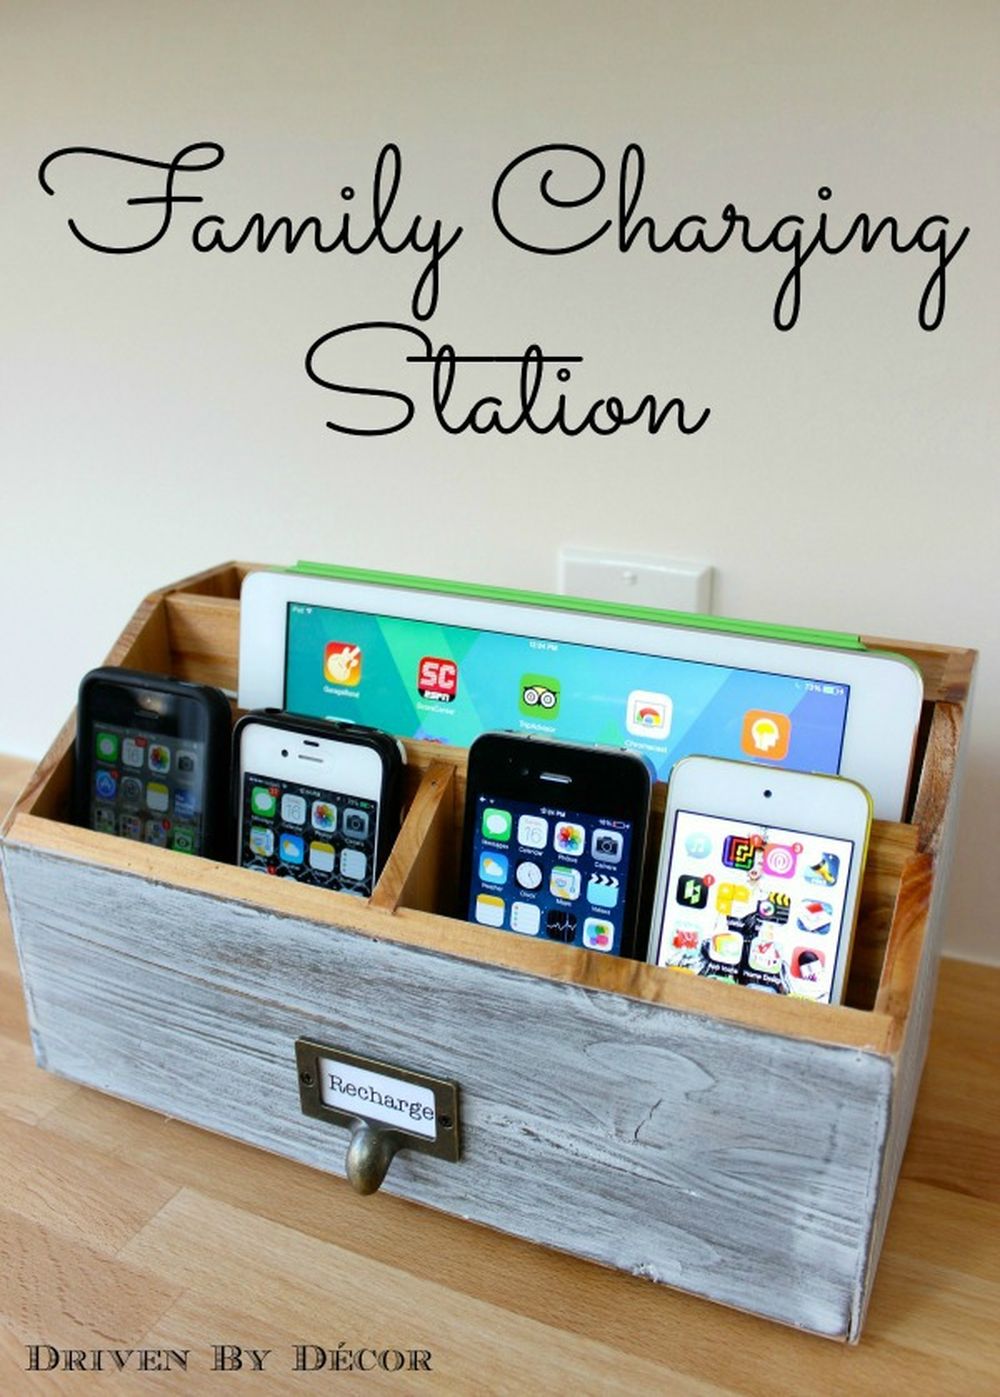 Diy family charging station christmas gifts for dad